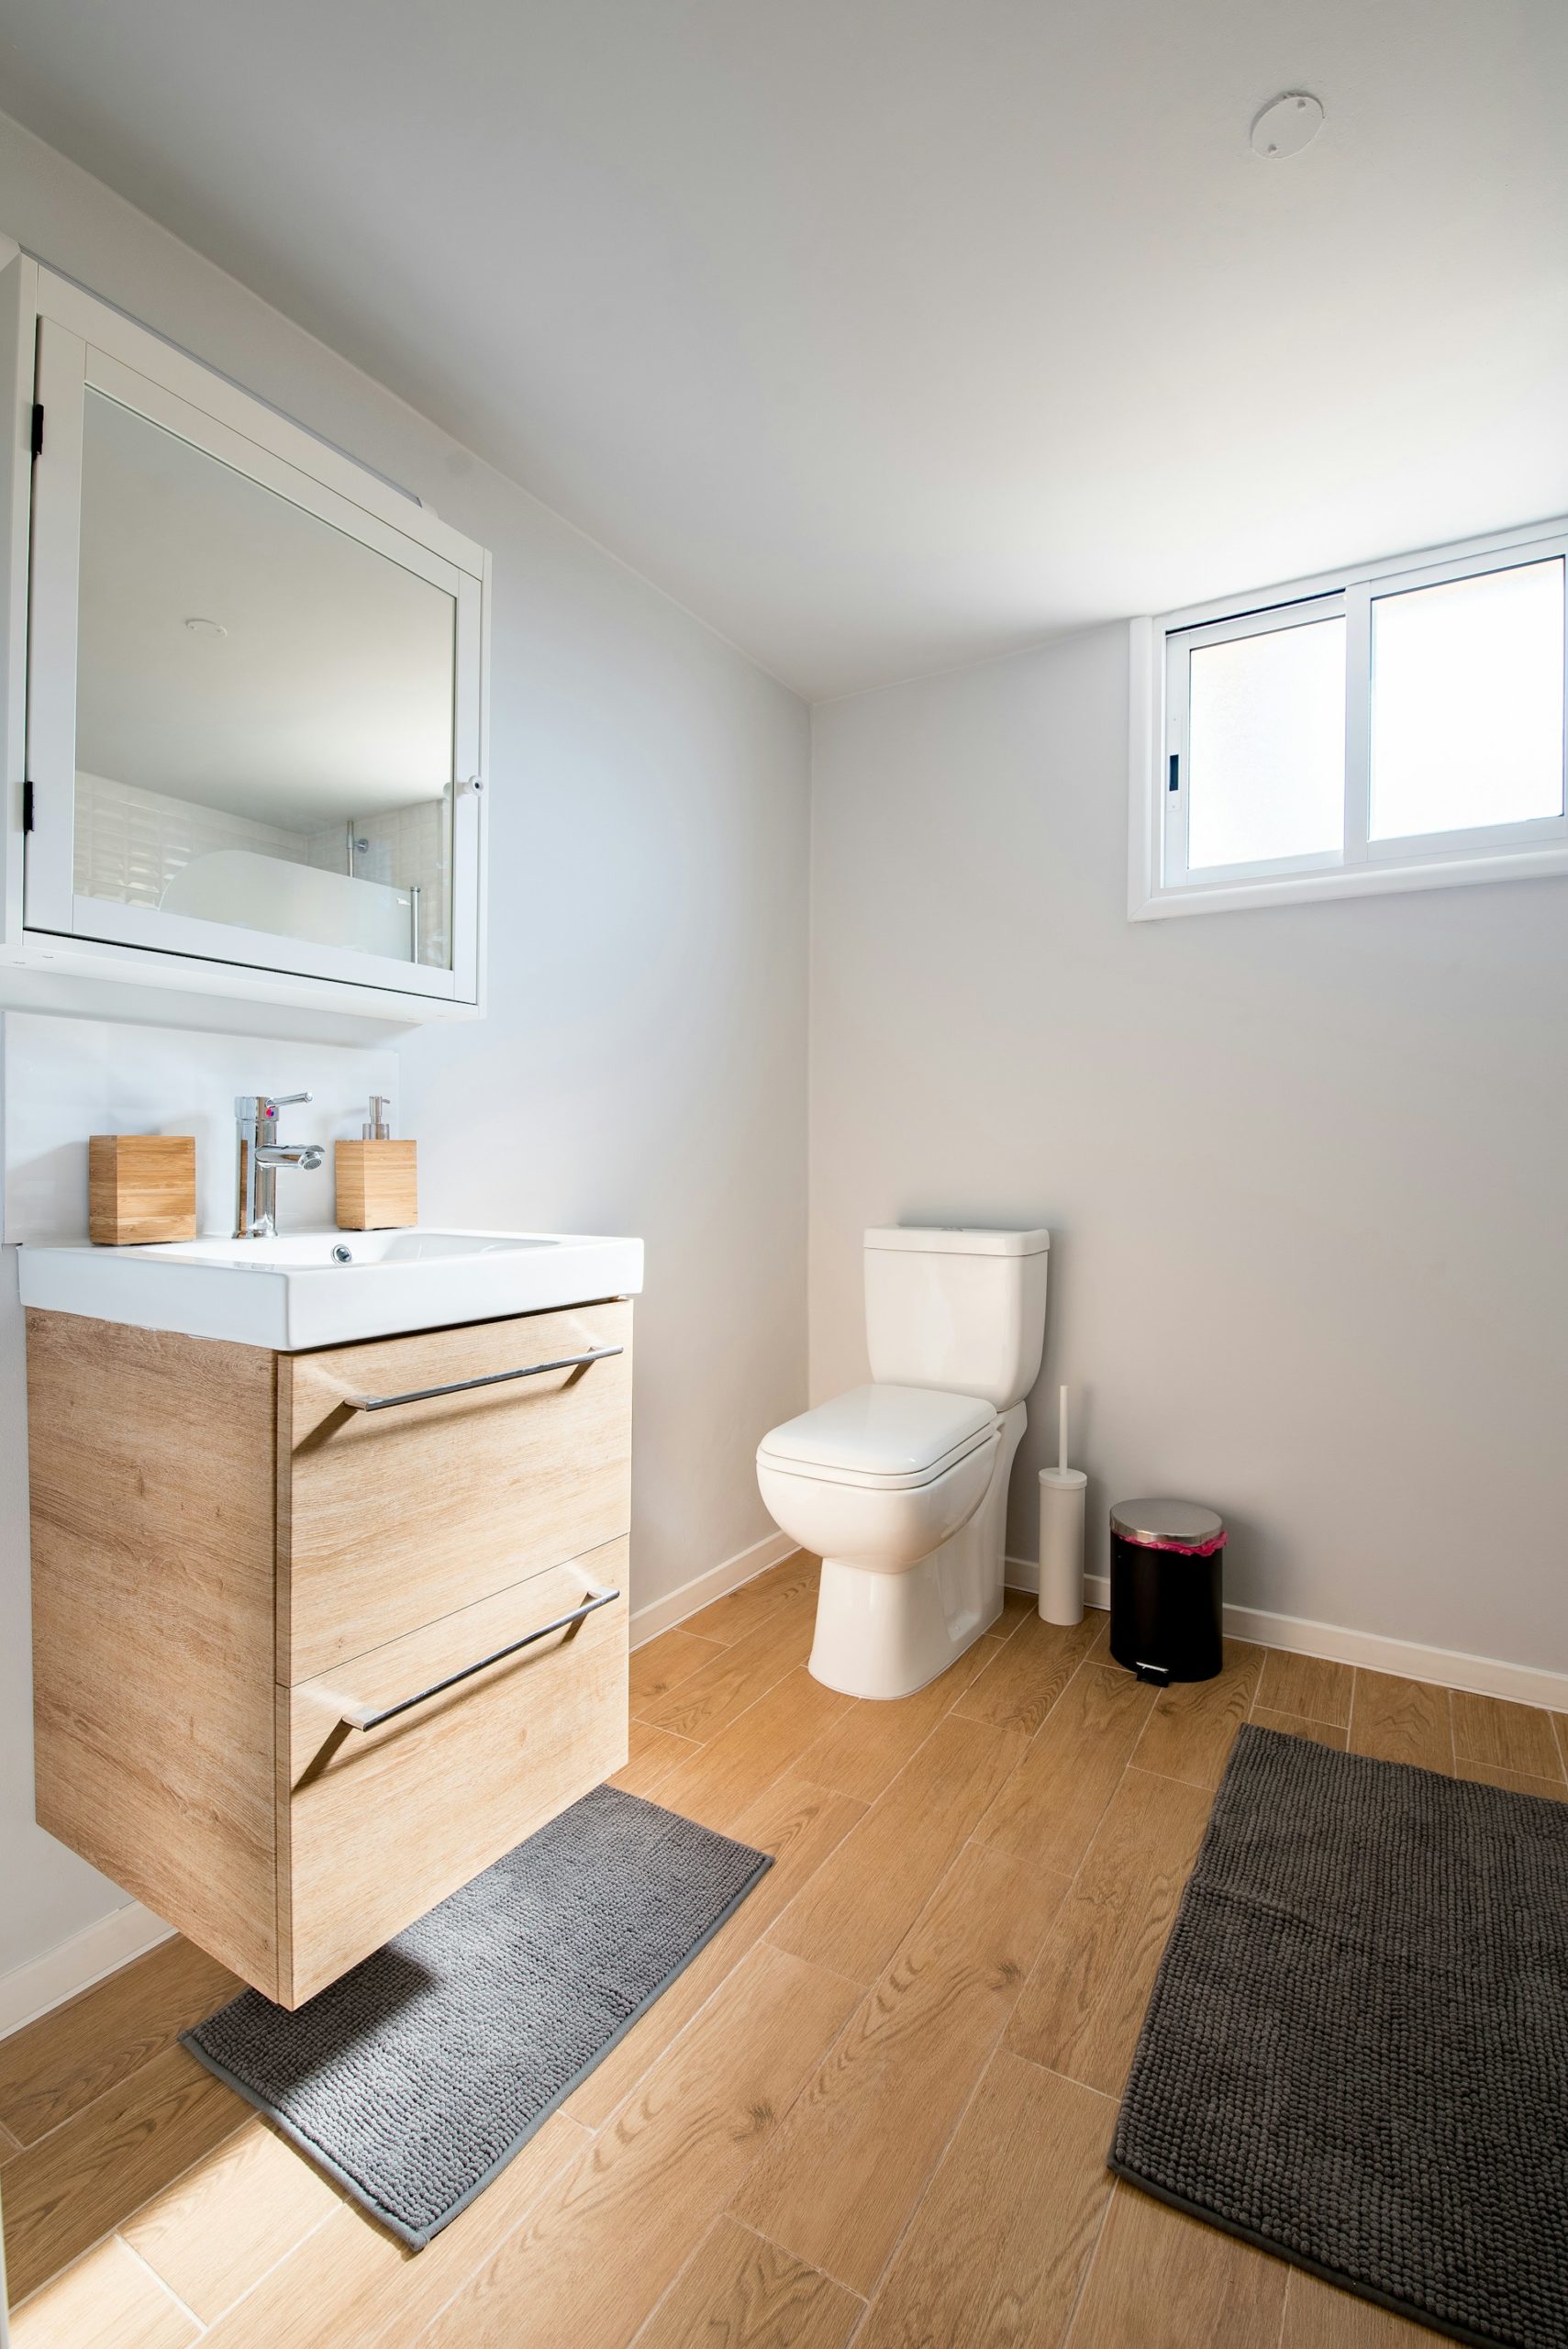 Transforming Tight Spaces - Cargo Trailer Bathroom Ideas for Every Need